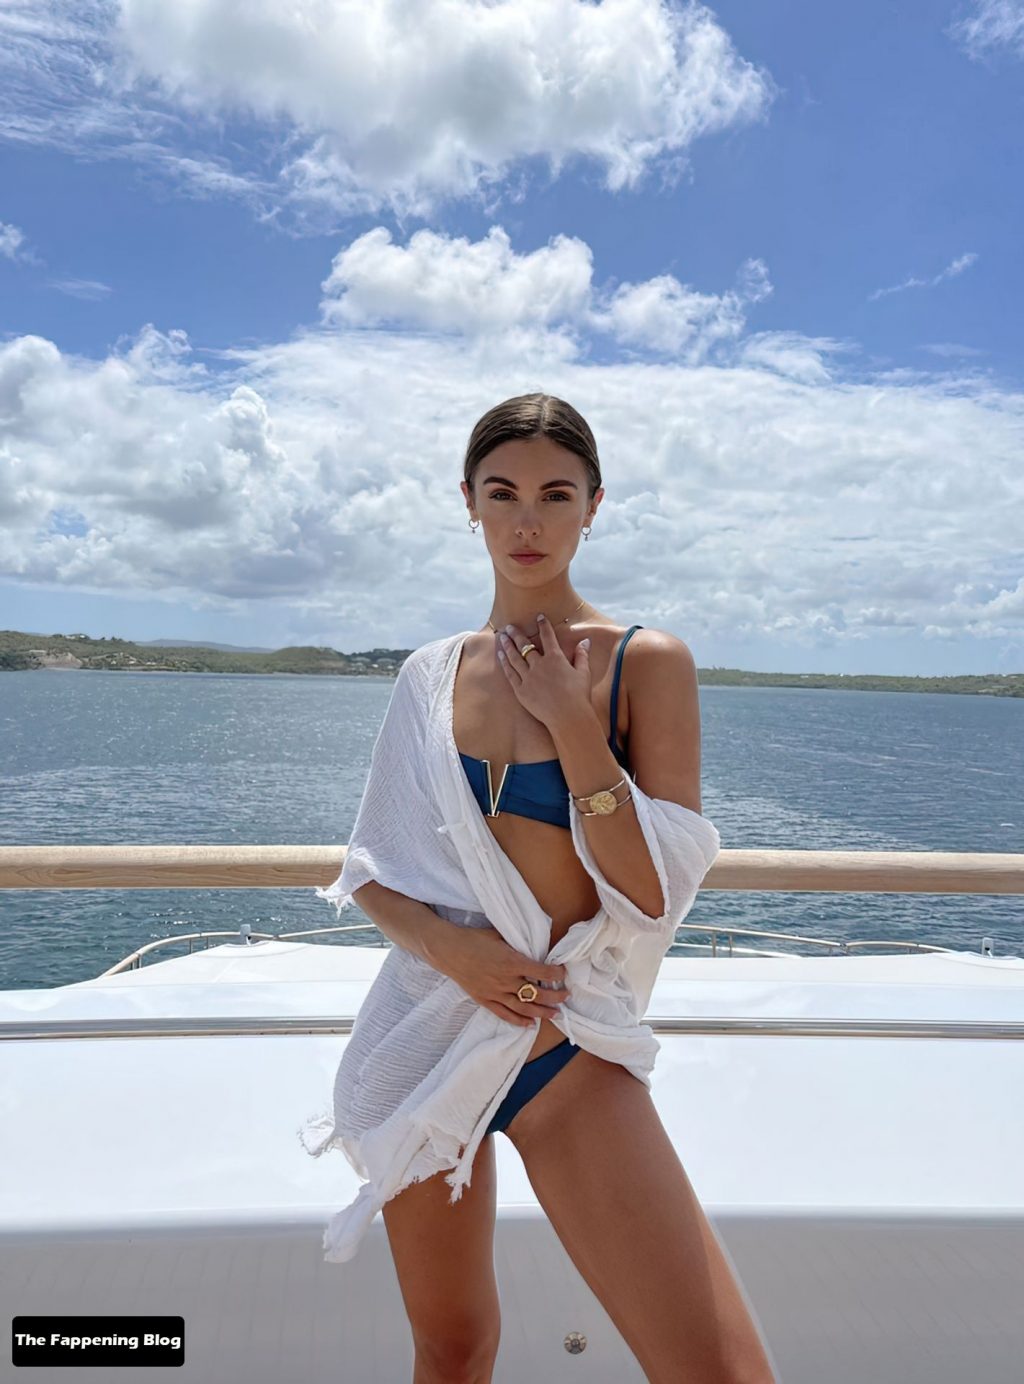 Carmella Rose Poses Topless on a Boat (6 Photos)